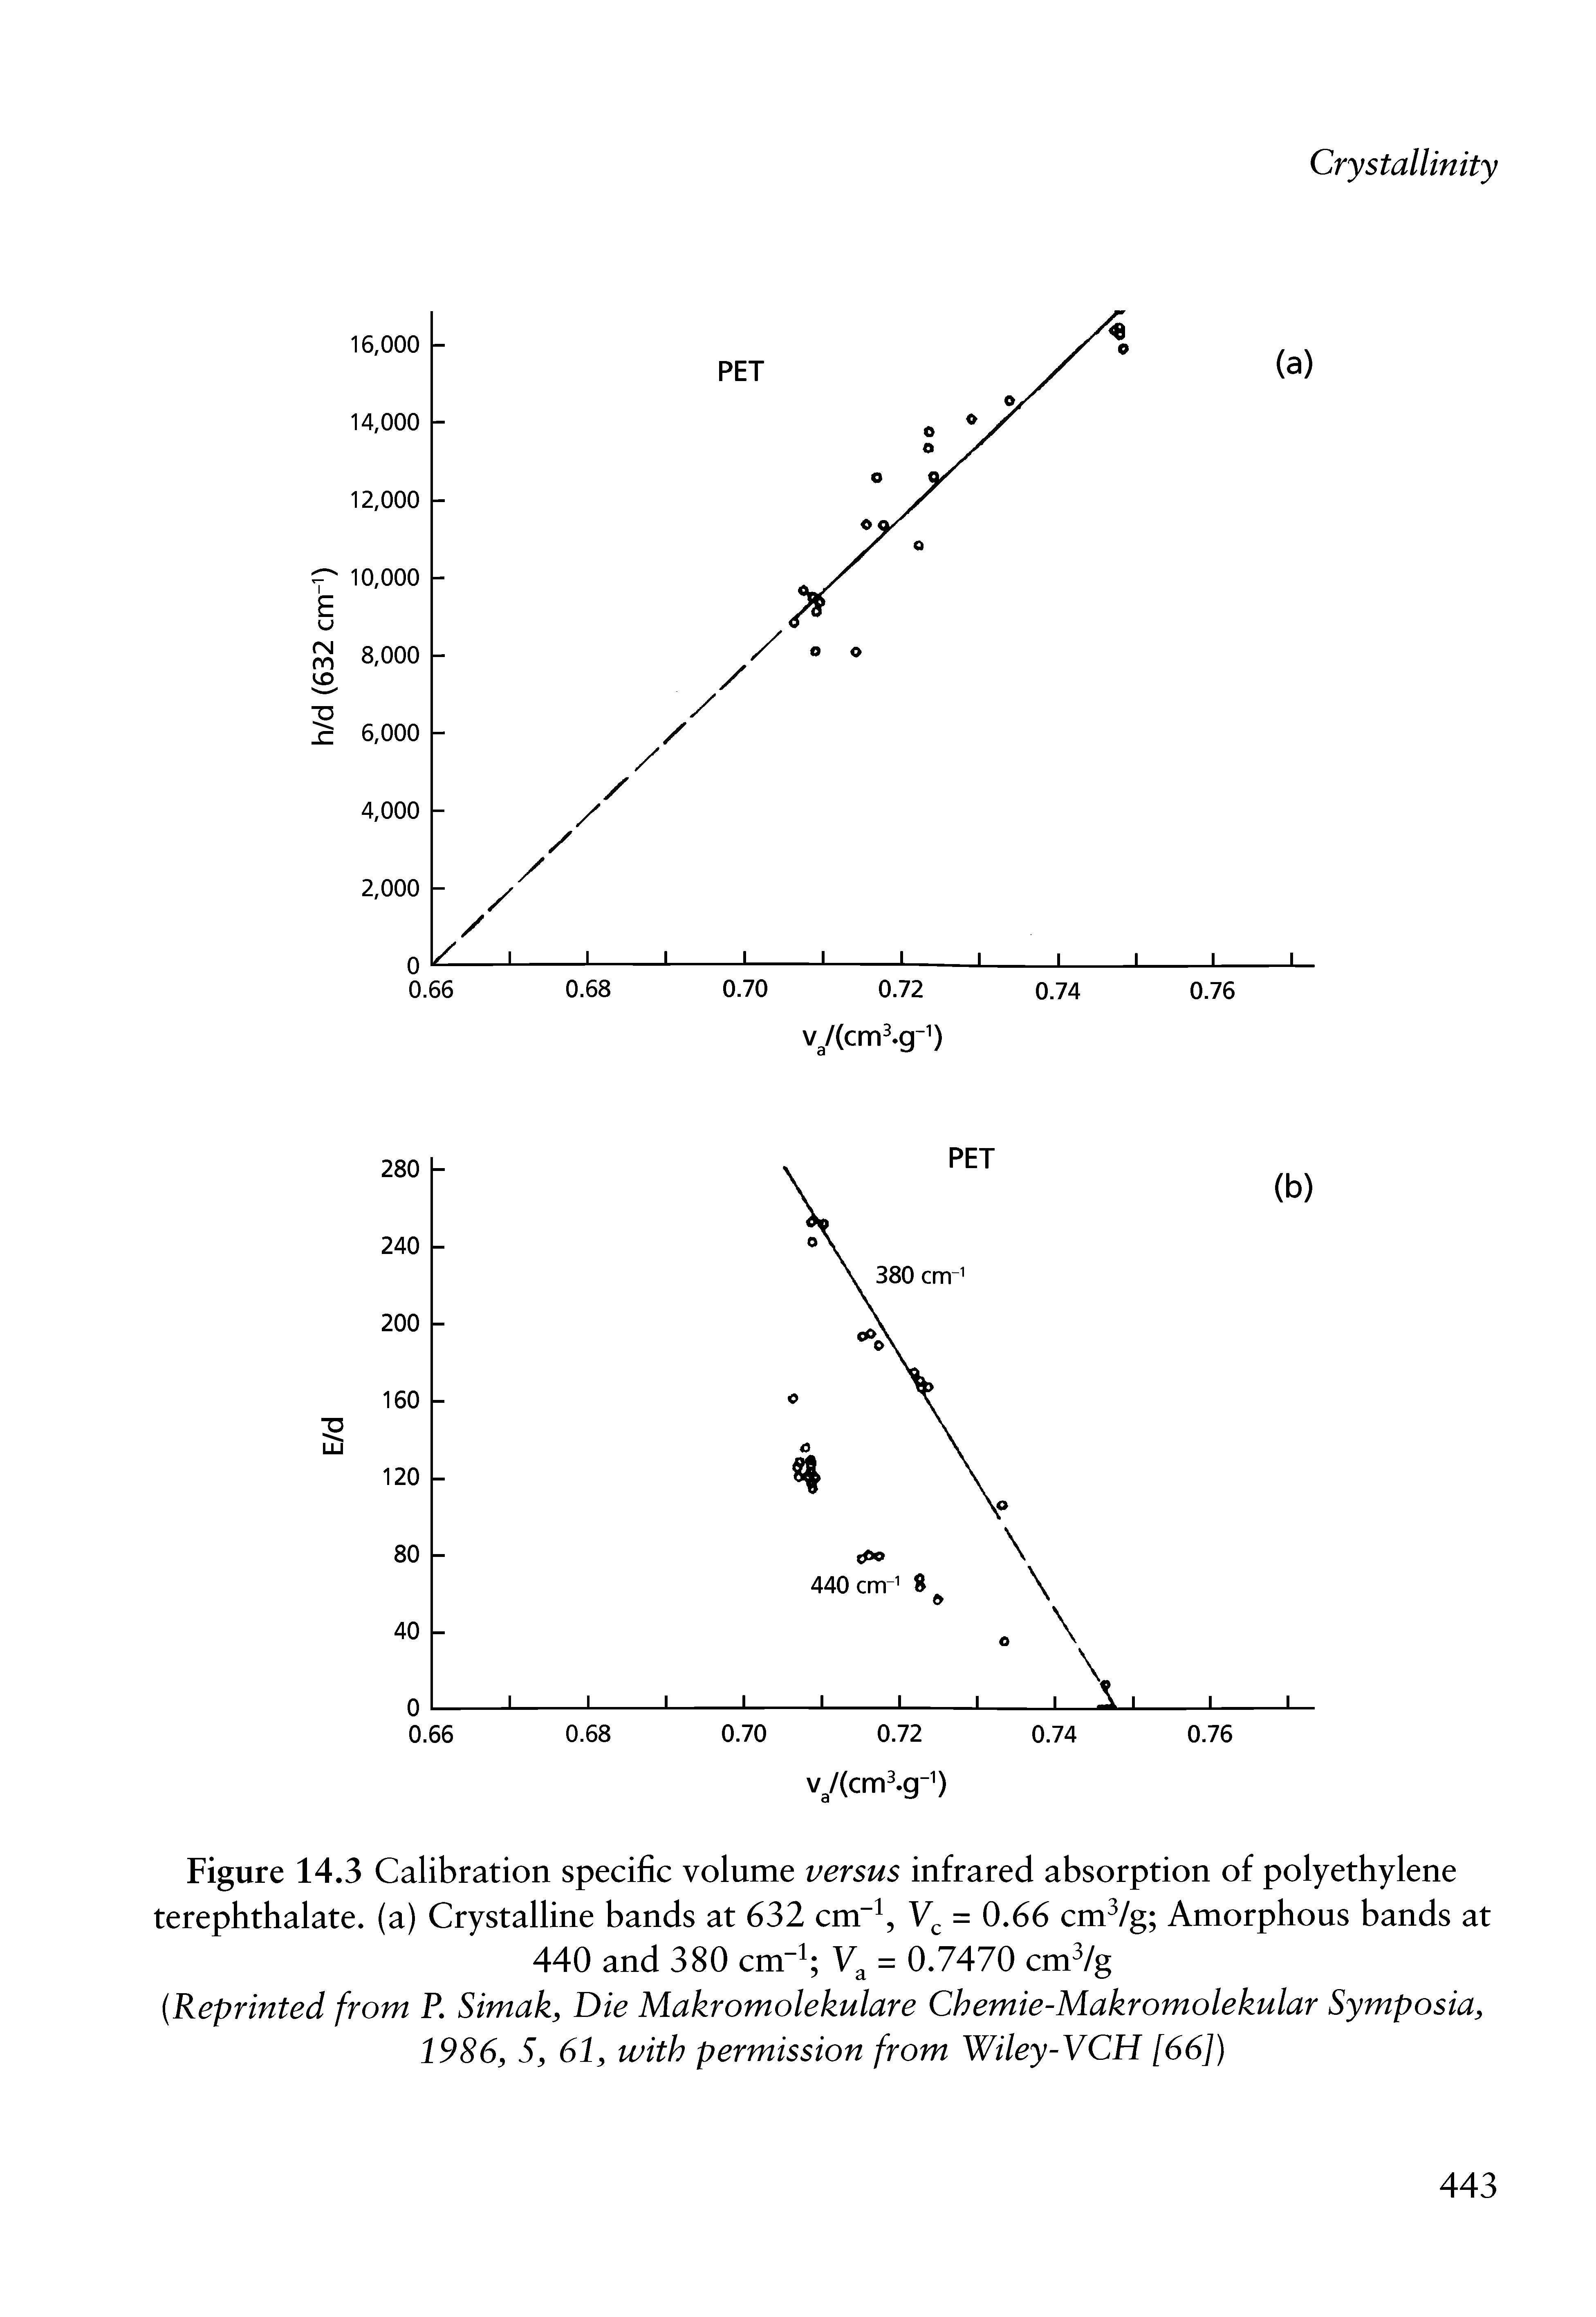 Figure 14.3 Calibration specific volume versus infrared absorption of polyethylene terephthalate. (a) Crystalline bands at 632 cm- = 0.66 cm /g Amorphous bands at...